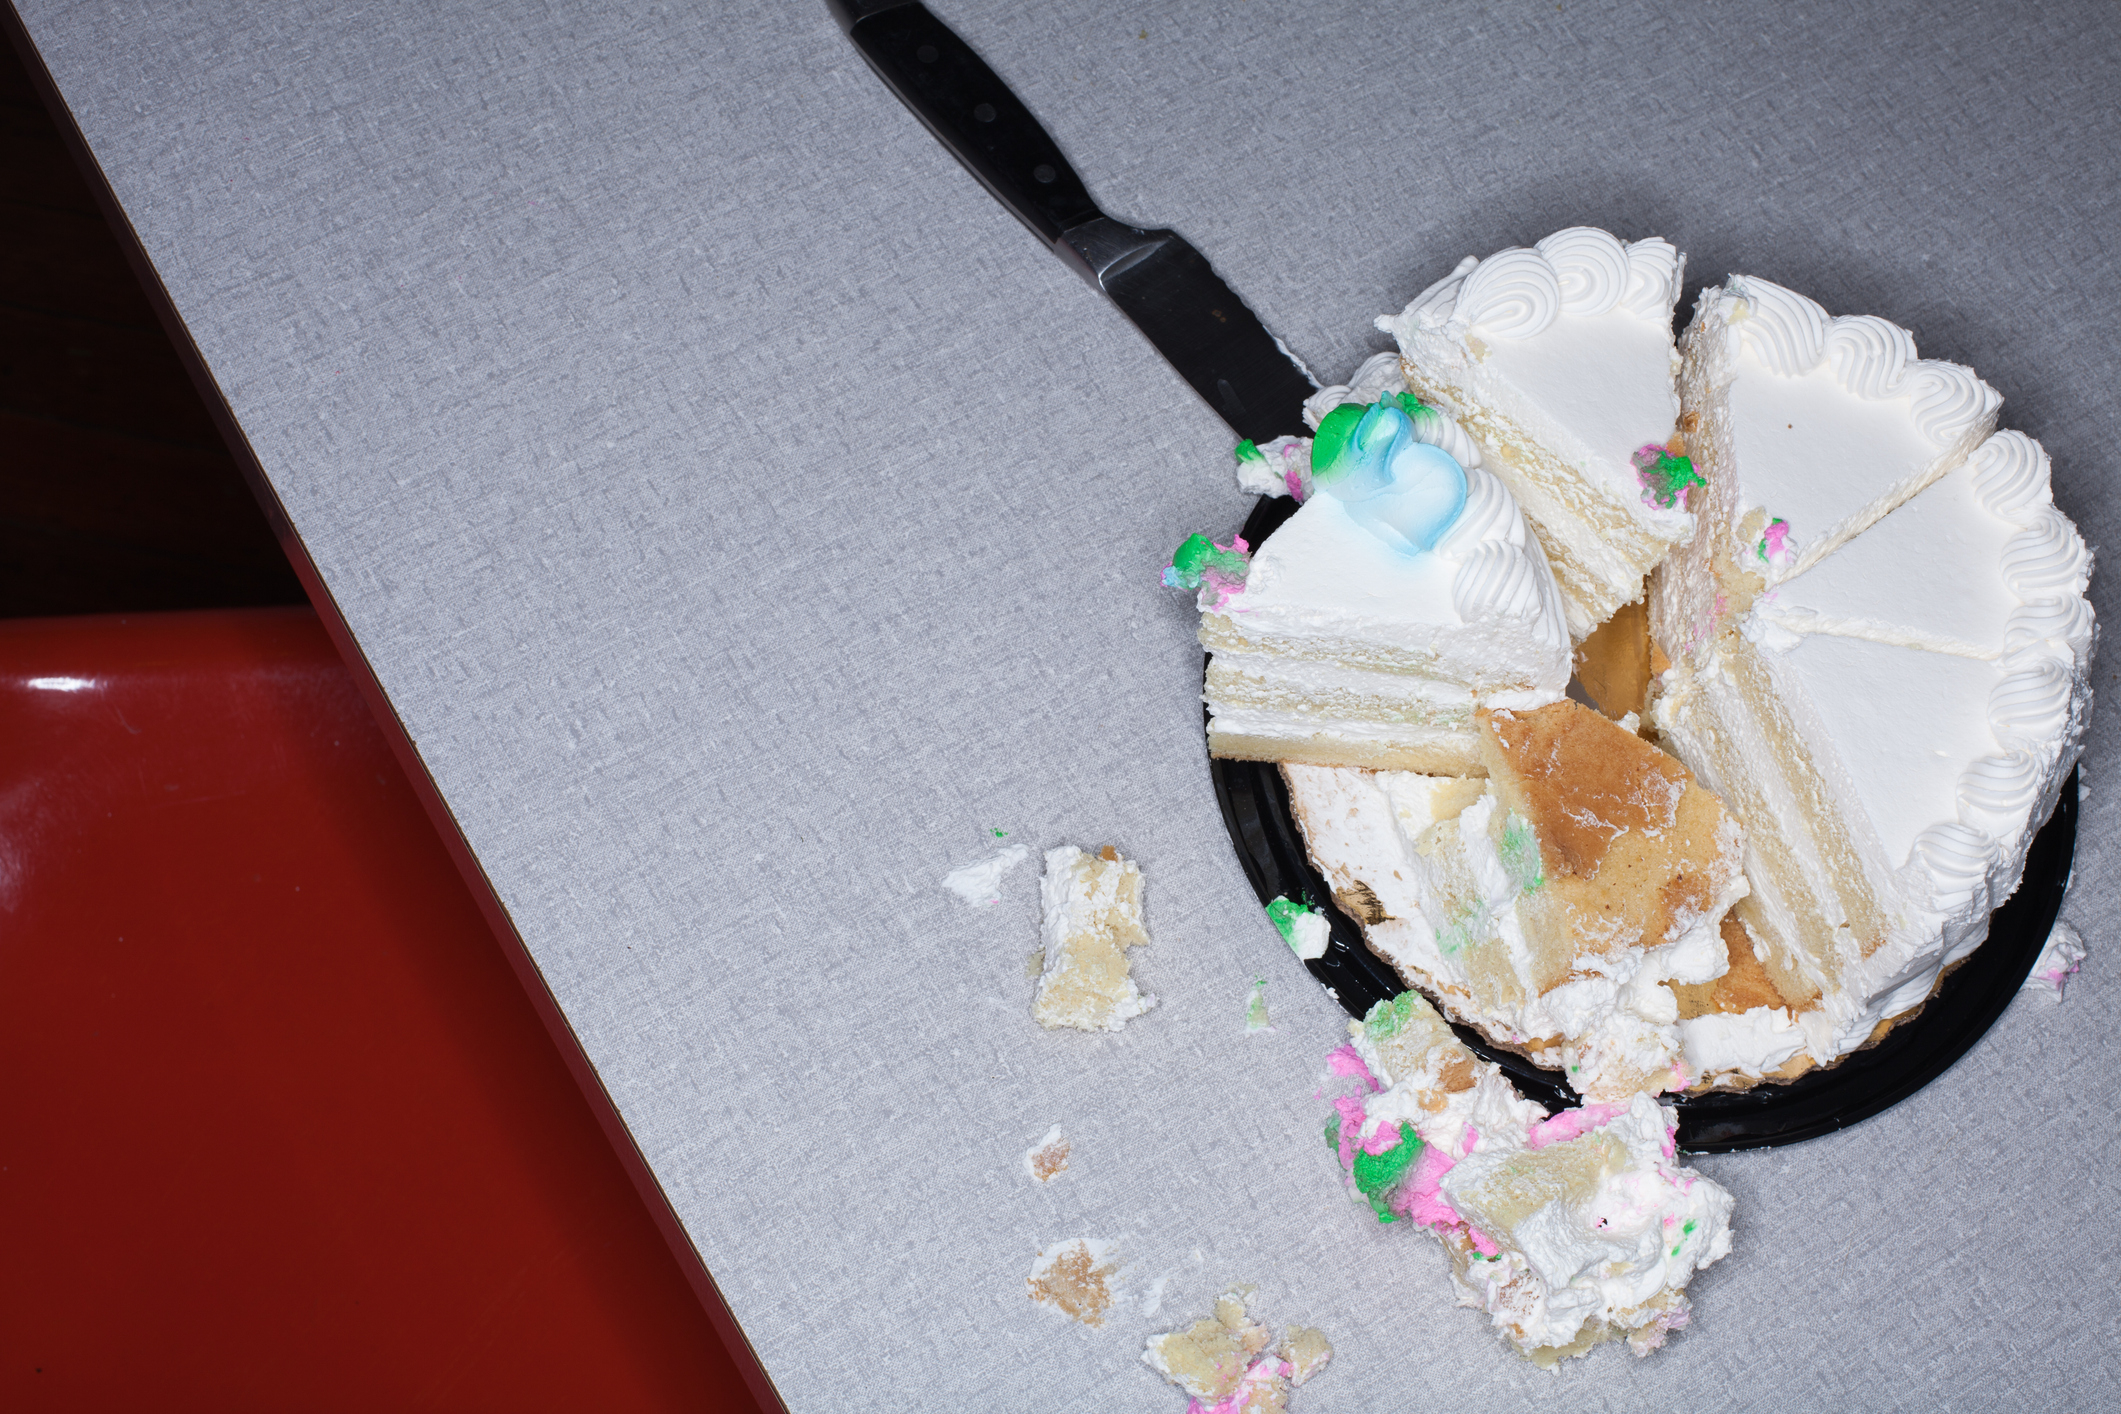 A partly eaten cake with one slice on a spatula, messy icing and crumbs on table